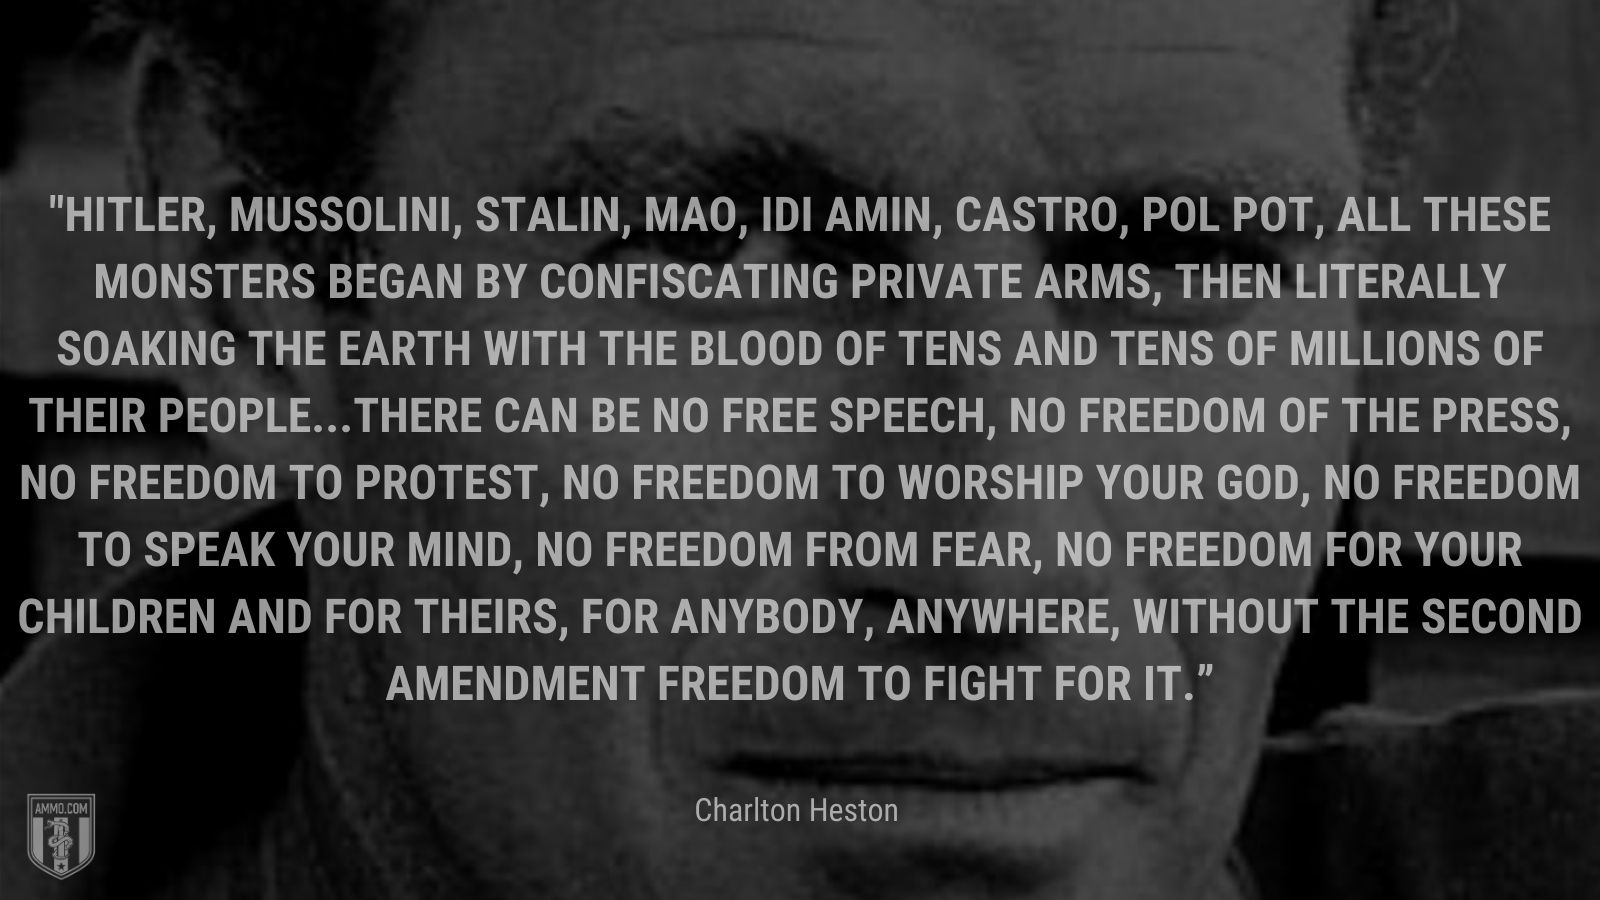 “Hitler, Mussolini, Stalin, Mao, Idi Amin, Castro, Pol Pot, all these monsters began by confiscating private arms, then literally soaking the earth with the blood of tens and tens of millions of their people...There can be no free speech, no freedom of the press, no freedom to protest, no freedom to worship your god, no freedom to speak your mind, no freedom from fear, no freedom for your children and for theirs, for anybody, anywhere, without the Second Amendment freedom to fight for it.” - Charlton Heston